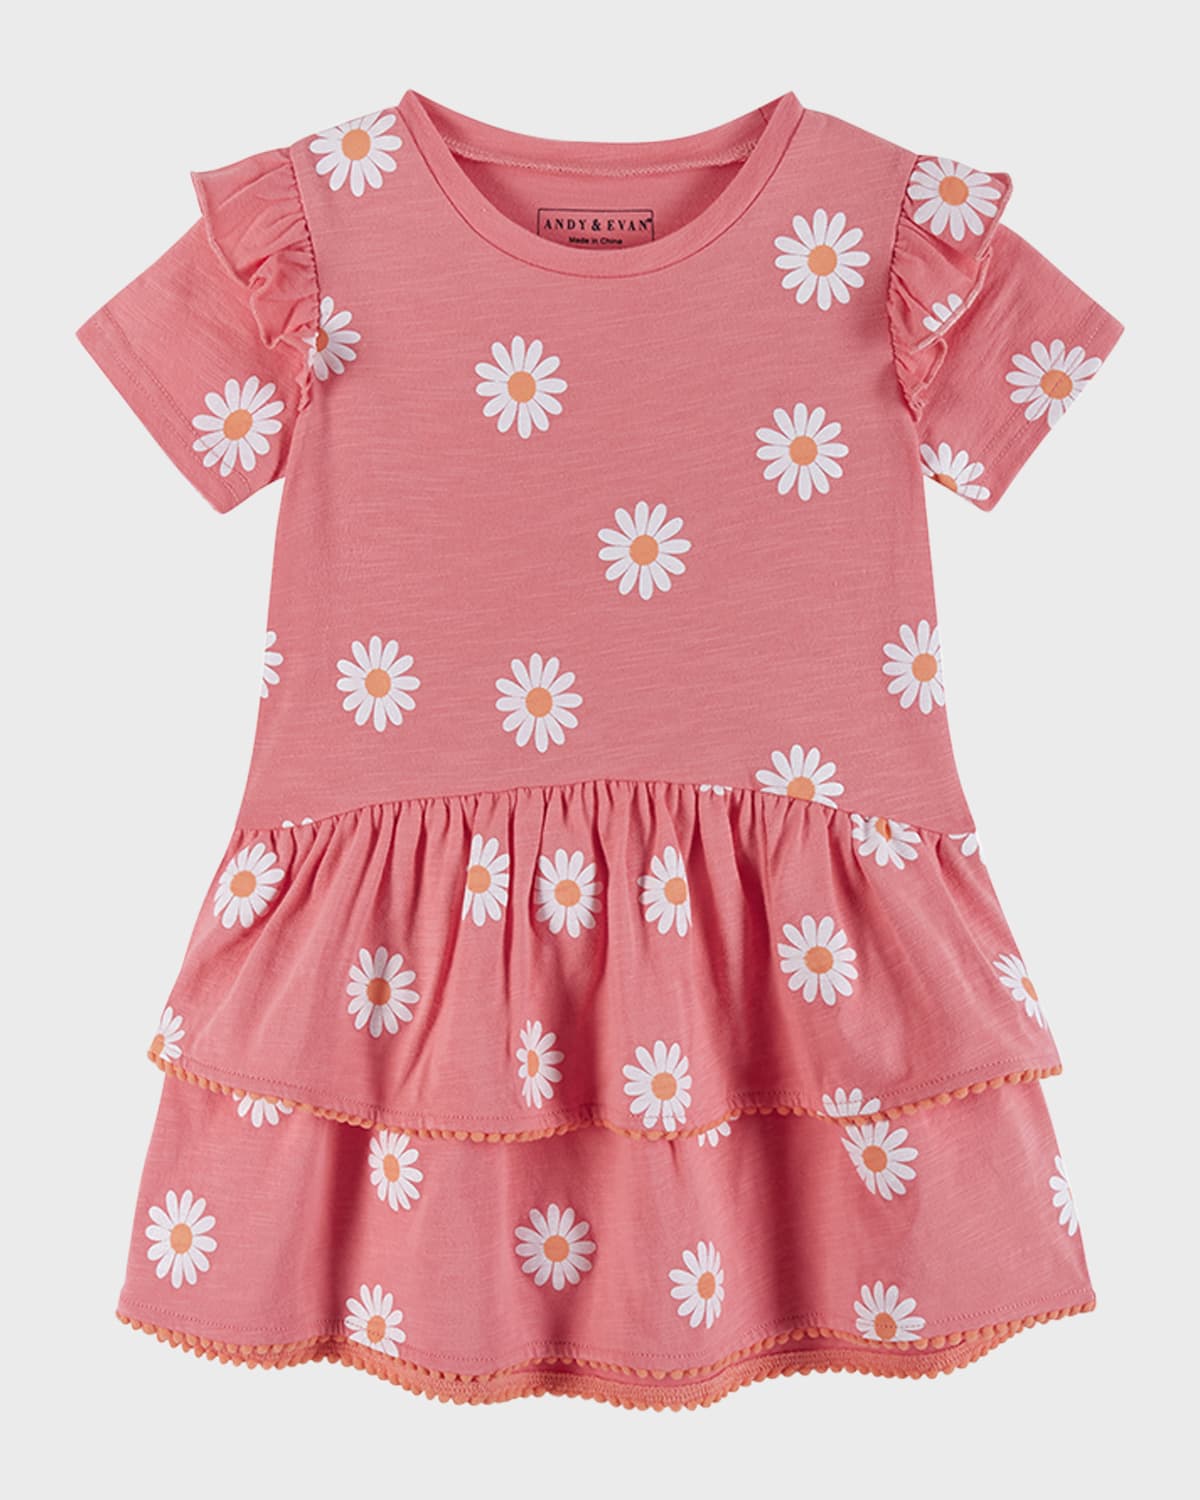 Andy & Evan Kids' Girl's Graphic Knit Tiered Dress In Pink Daisy